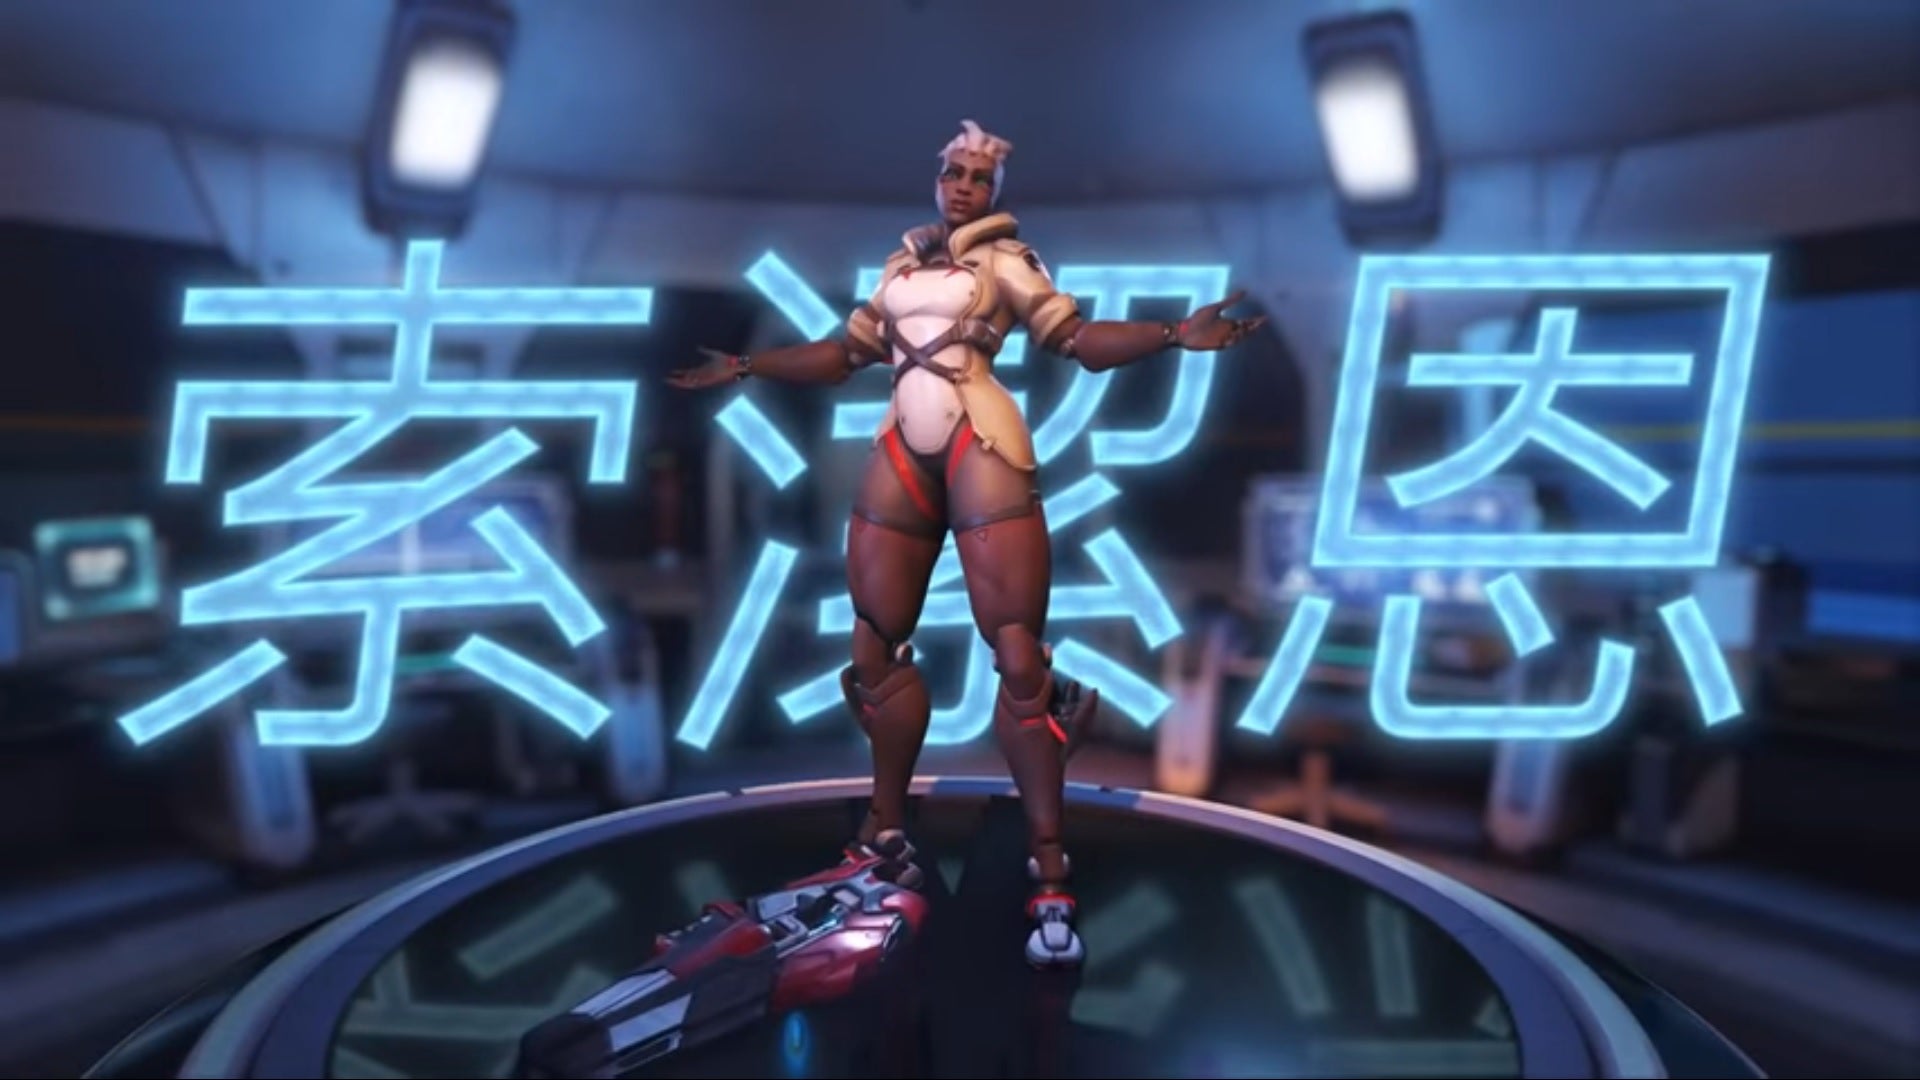 The Overwatch 2 character Sojourn, facing the camera with their arms spread wide.